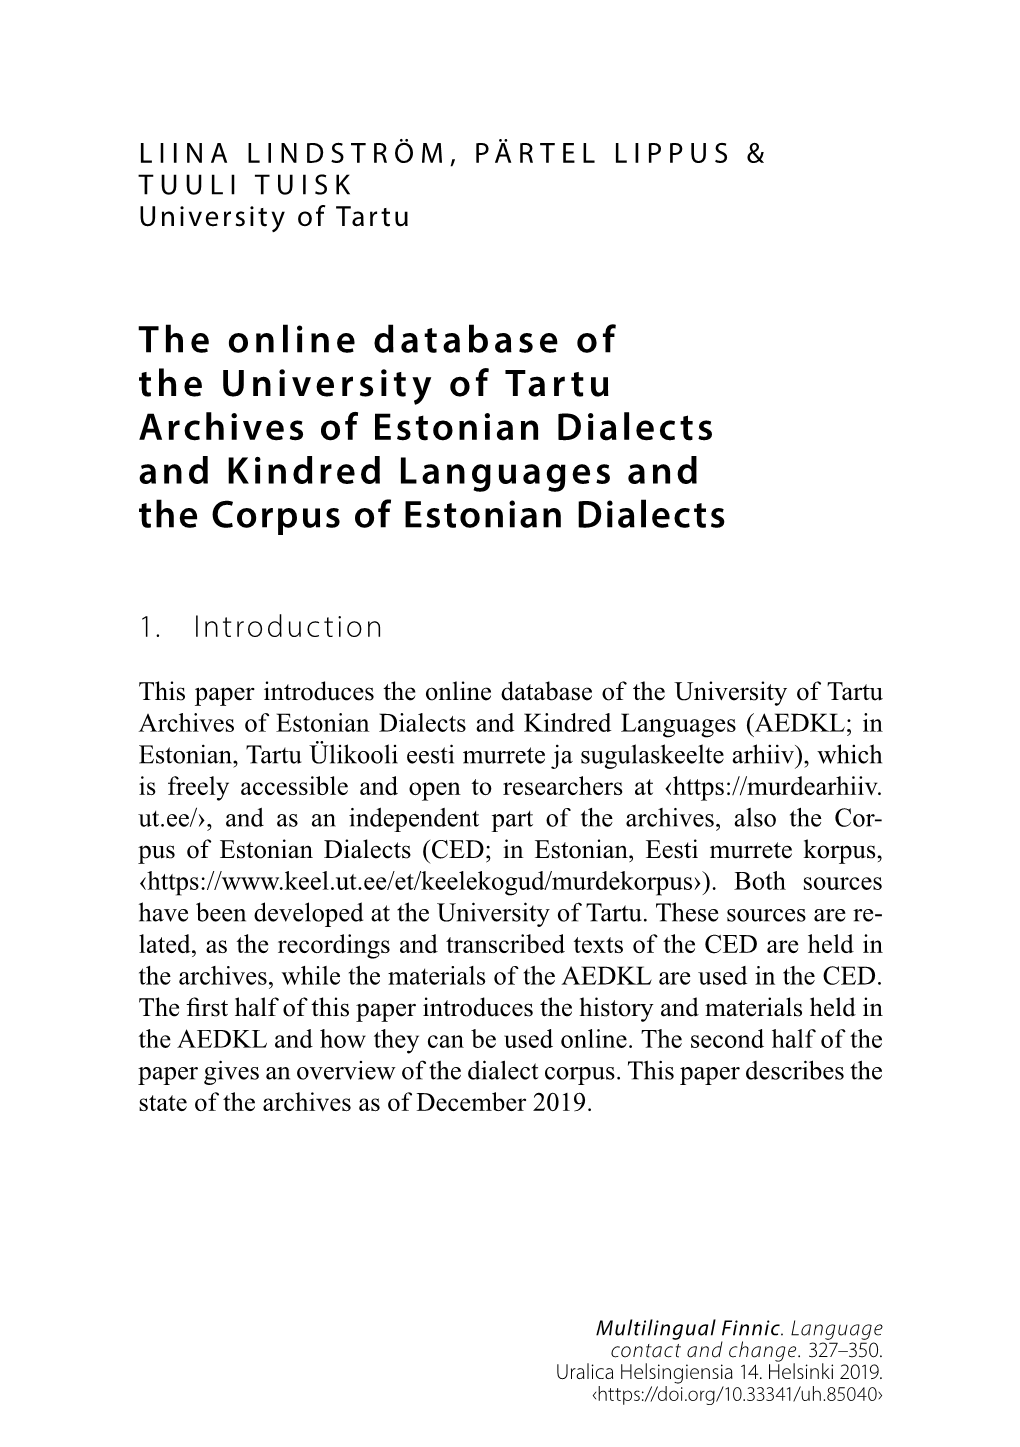 The Online Database of the University of Tartu Archives of Estonian Dialects and Kindred Languages and the Corpus of Estonian Dialects